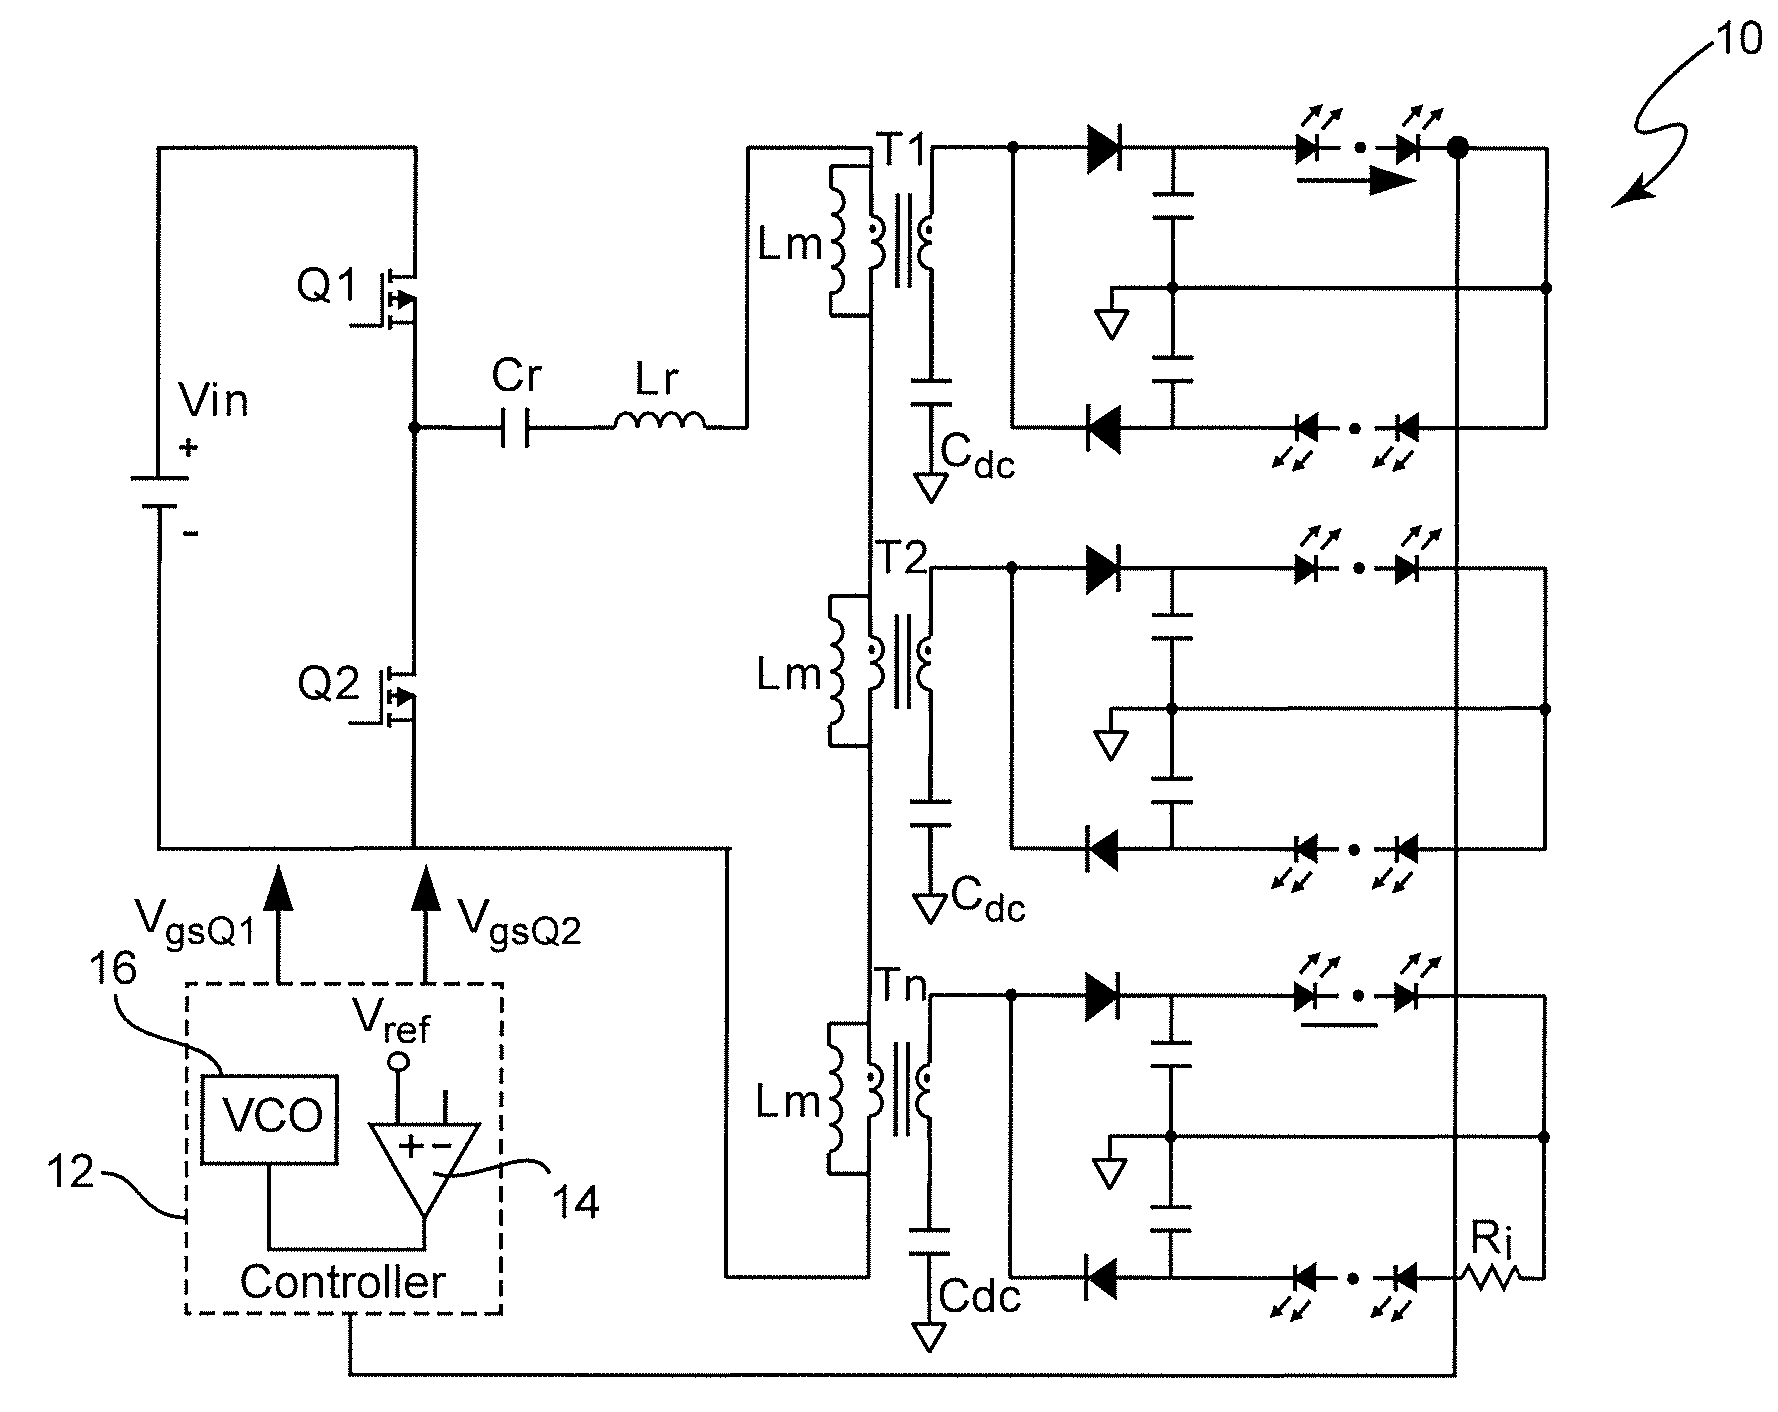 Optimal Trajectory Control for LLC Resonant Converter for LED PWM Dimming